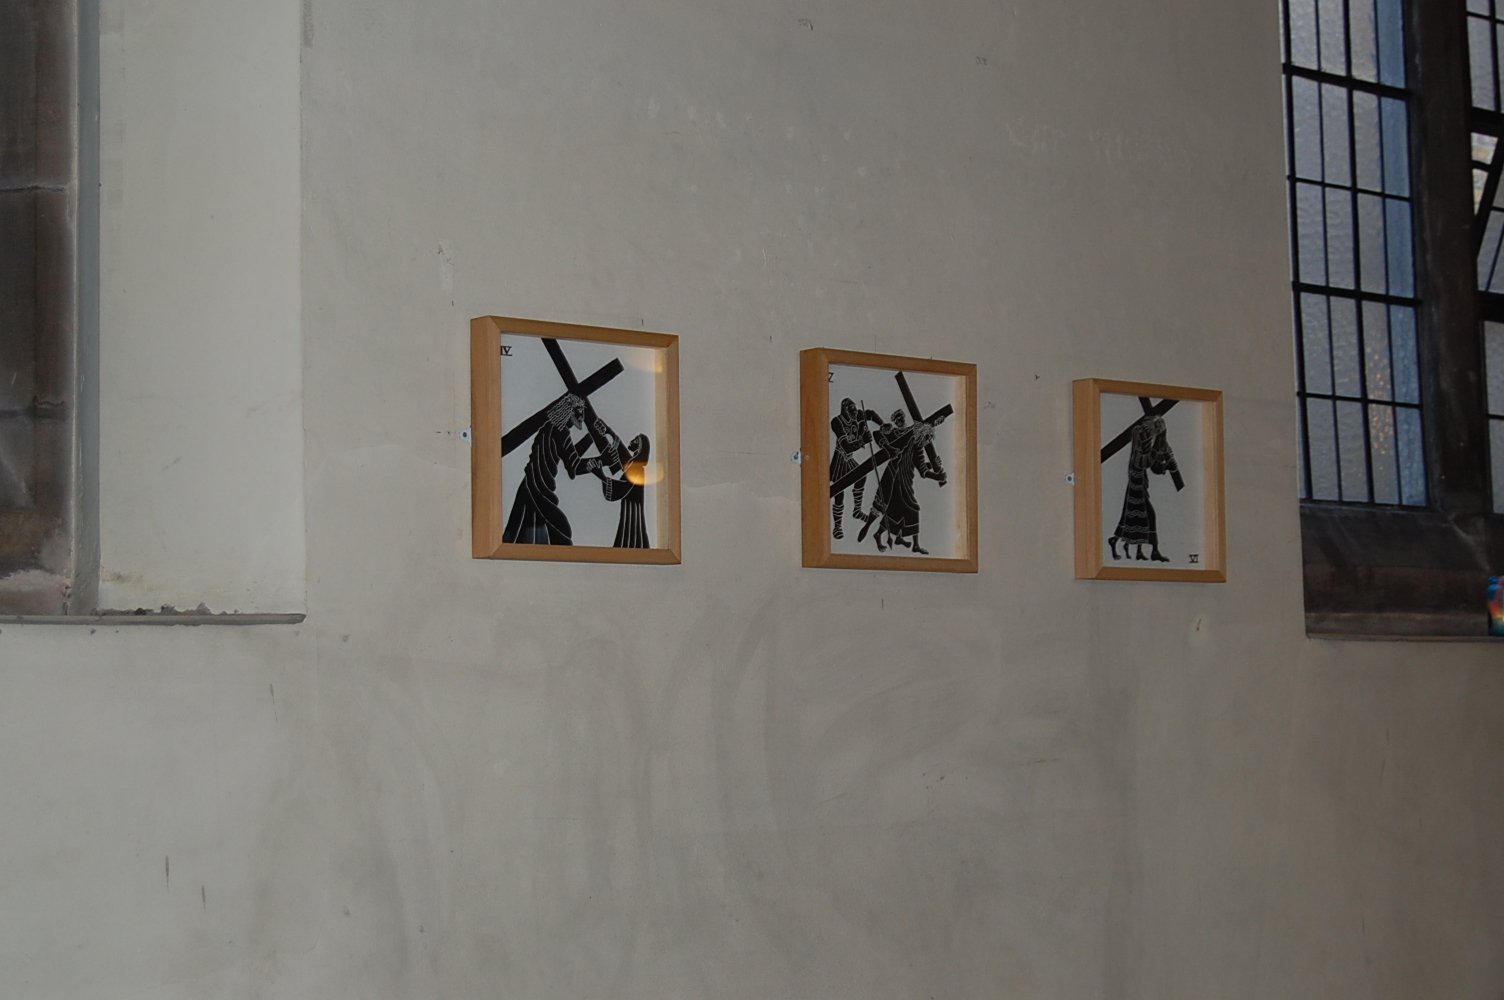 Stations of the Cross in situ